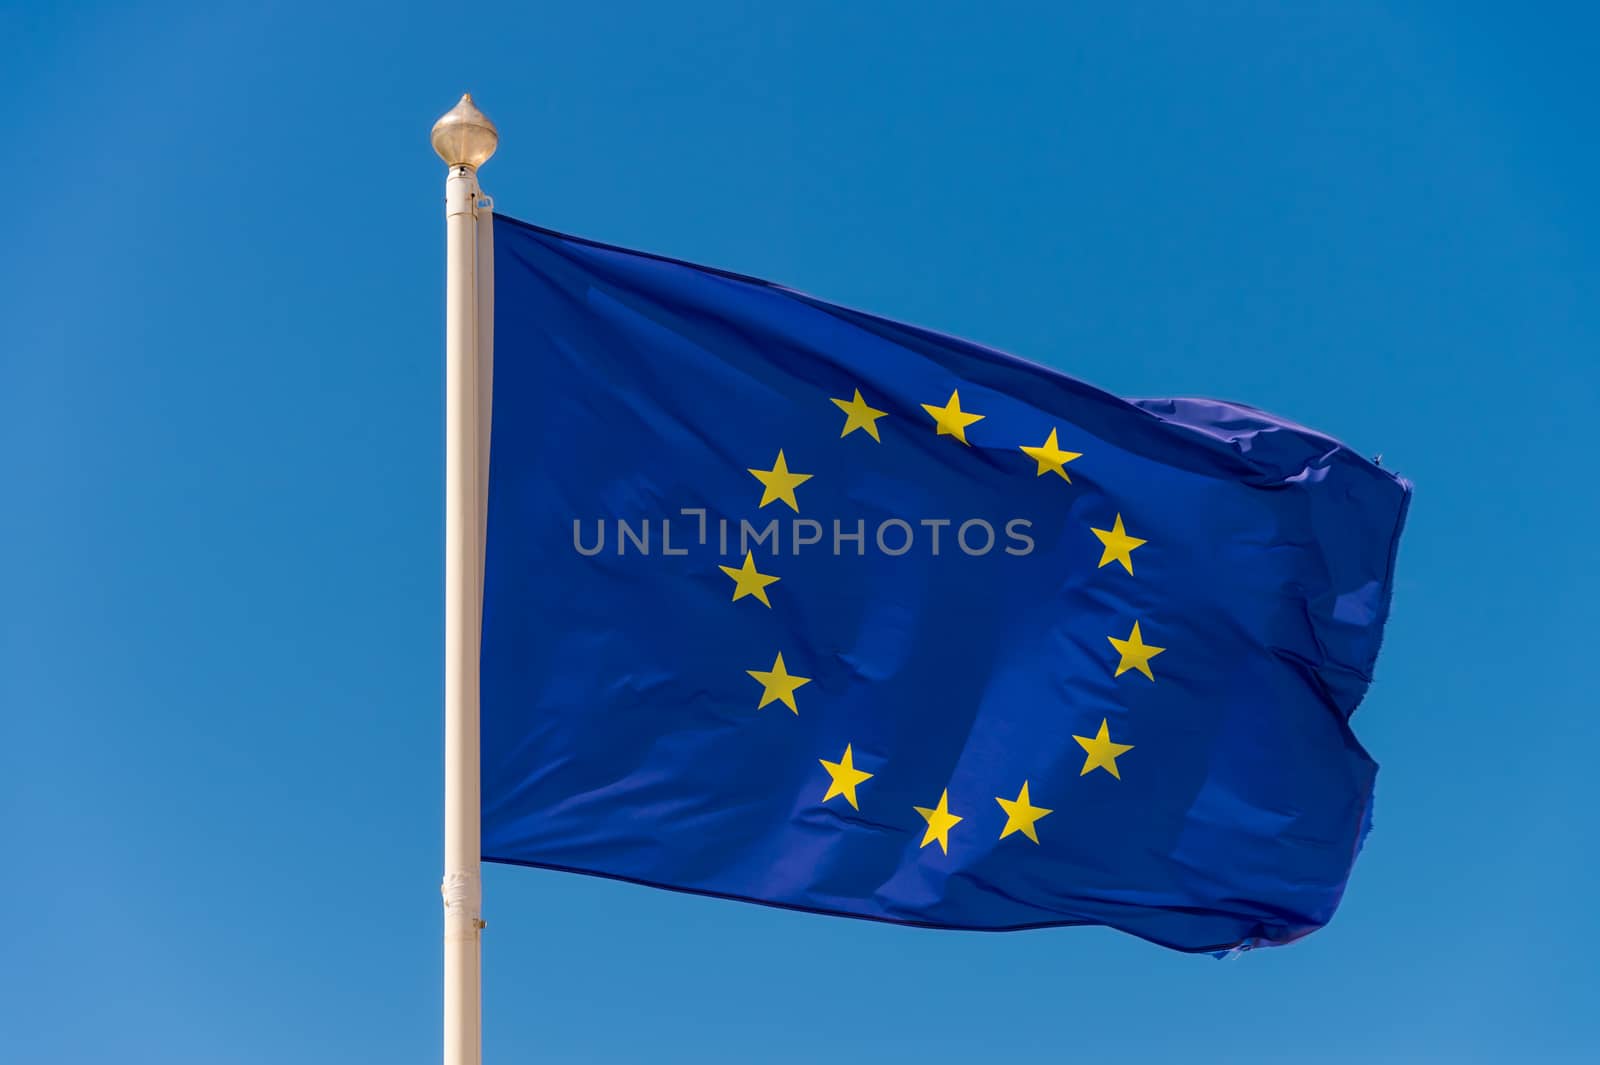 European flag waving against blue sky in Wimereux, France. by mbruxelle